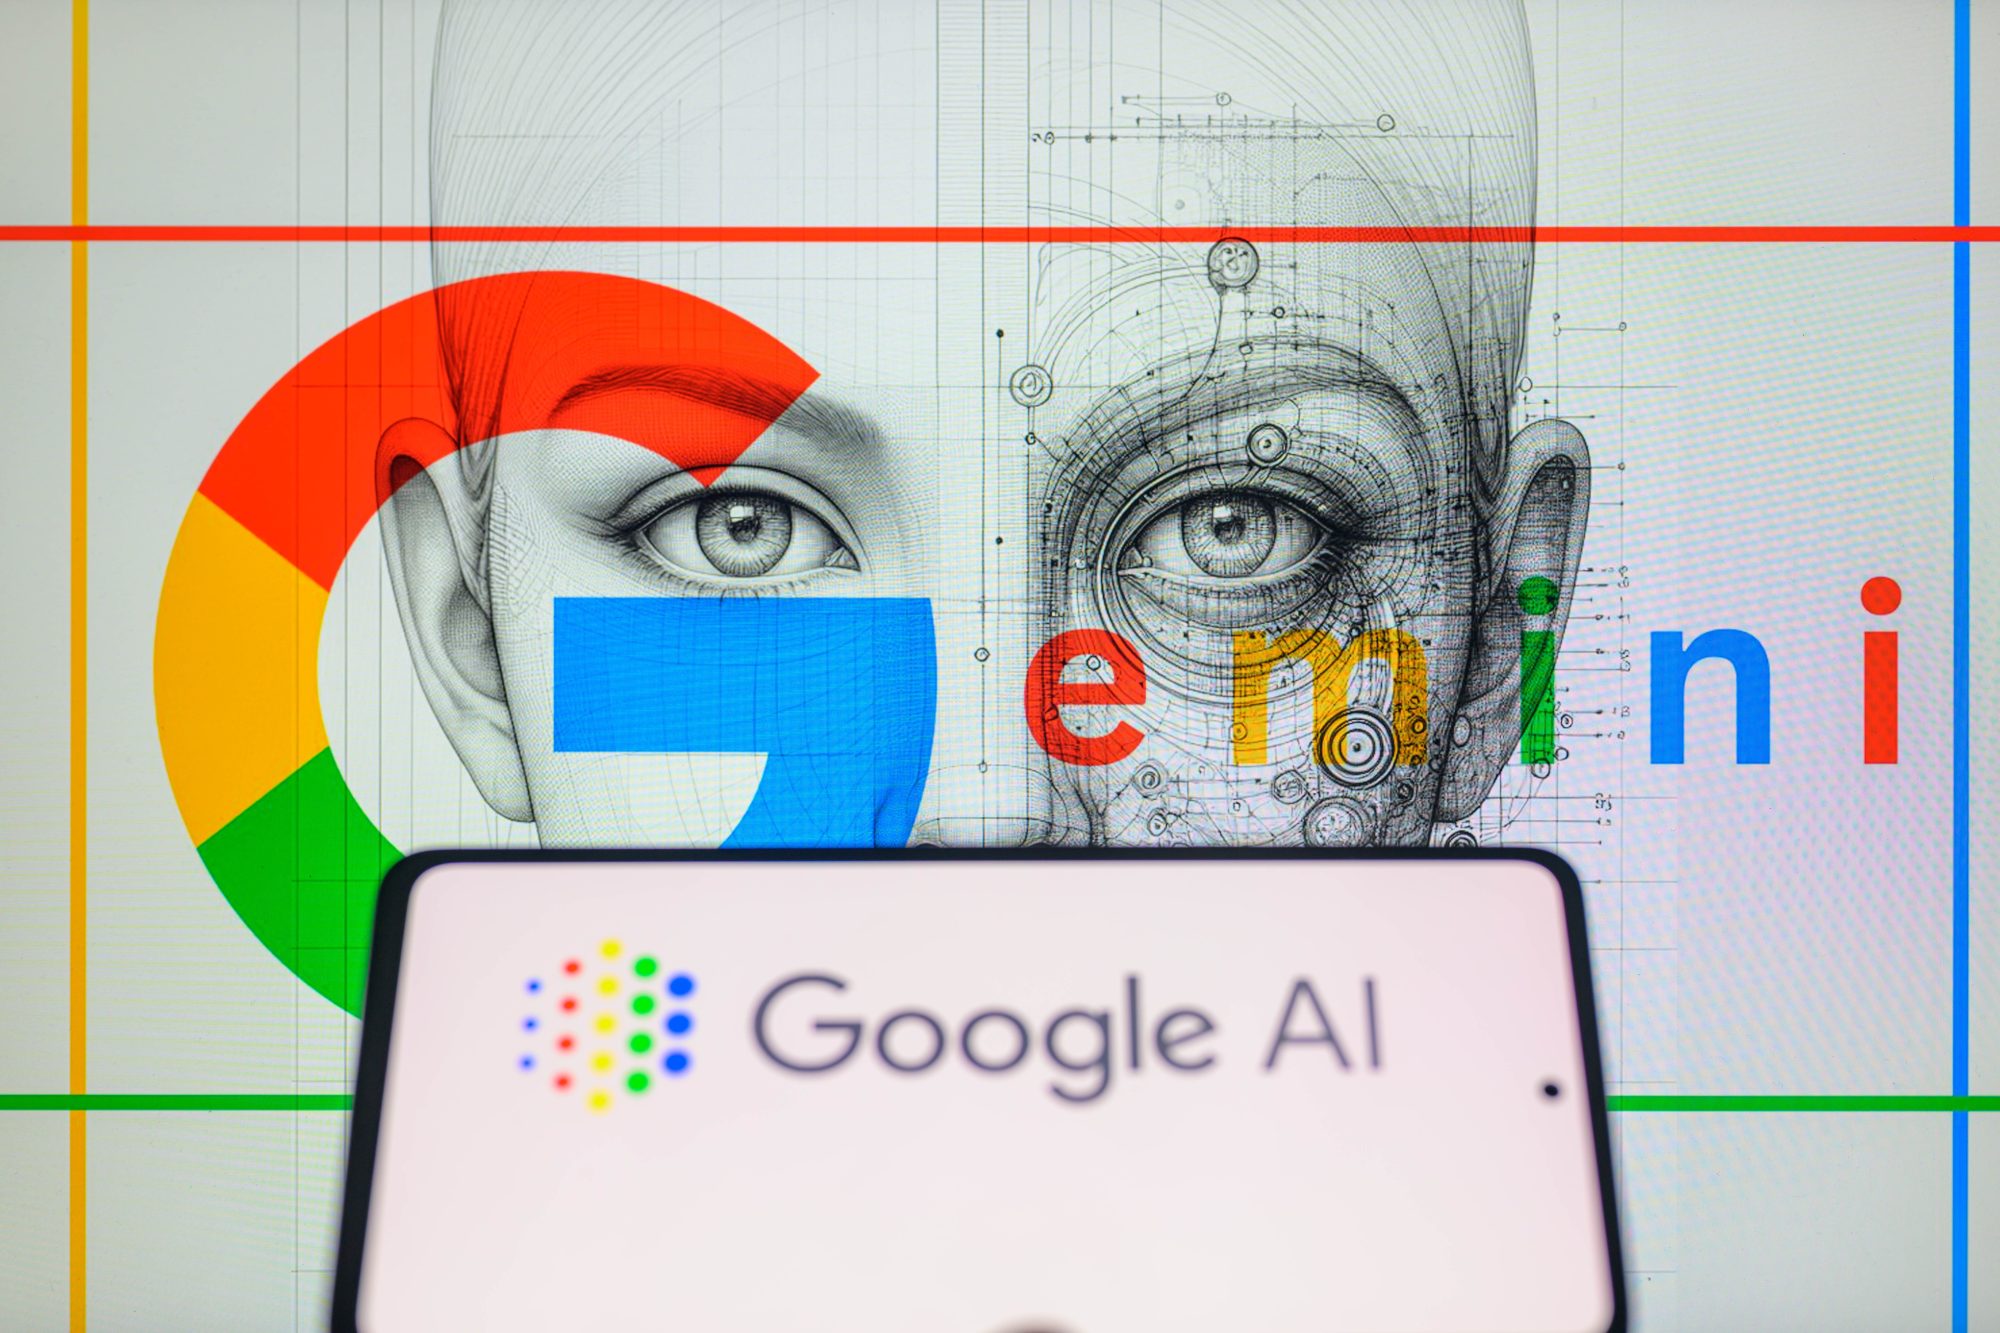 Nate Silver says Gemini's results are “heavily inflected with politics” that render it “biased” and “inaccurate” — and Google’s explanations are “pretty close to gaslighting.”